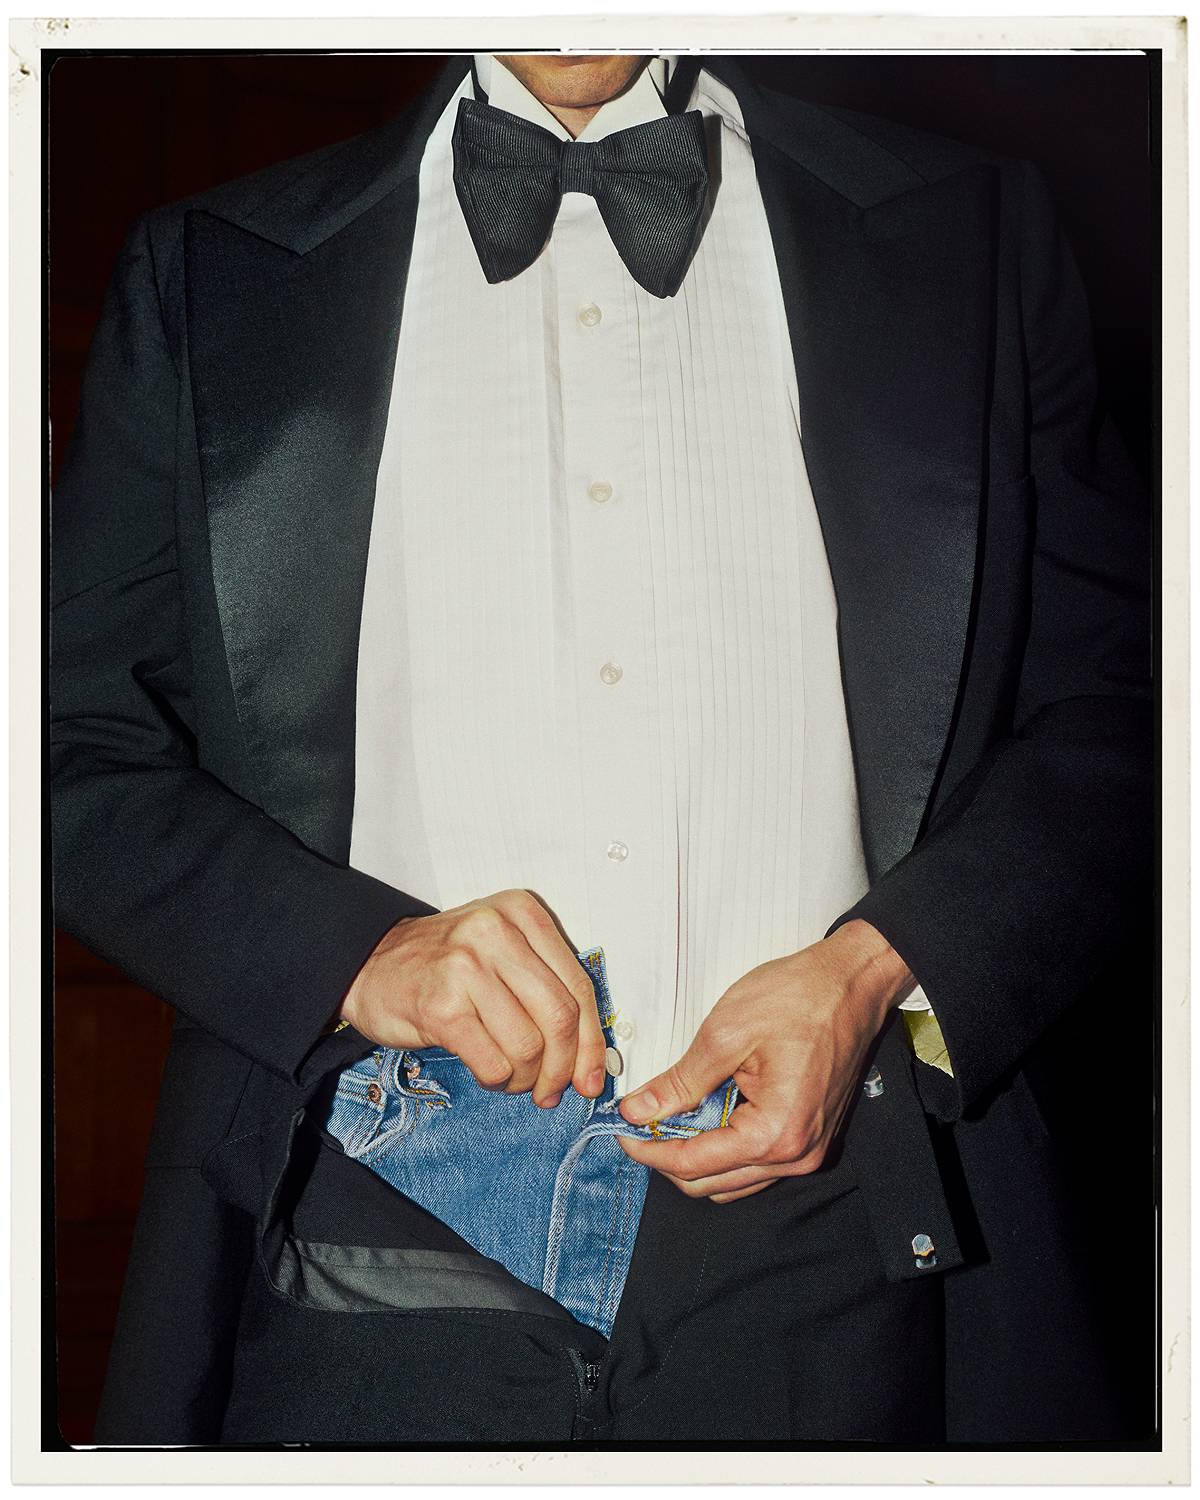 Person wearing blue jeans under their tuxedo.